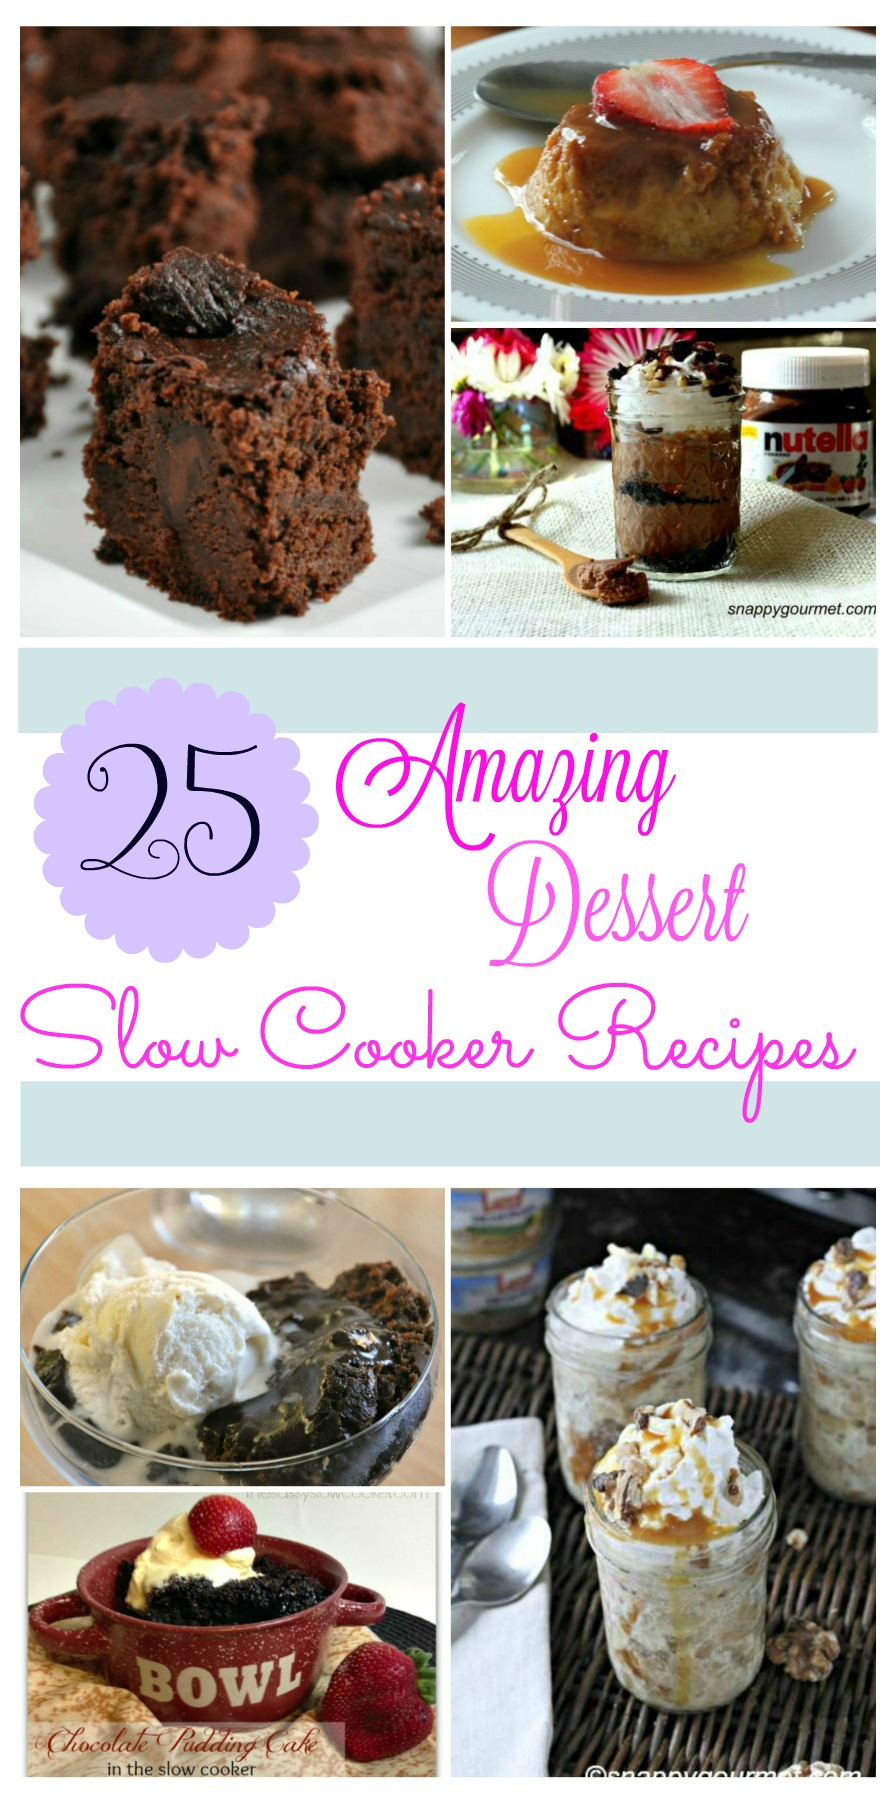 25 Amazing Dessert Slow Cooker Recipes | Budget Earth